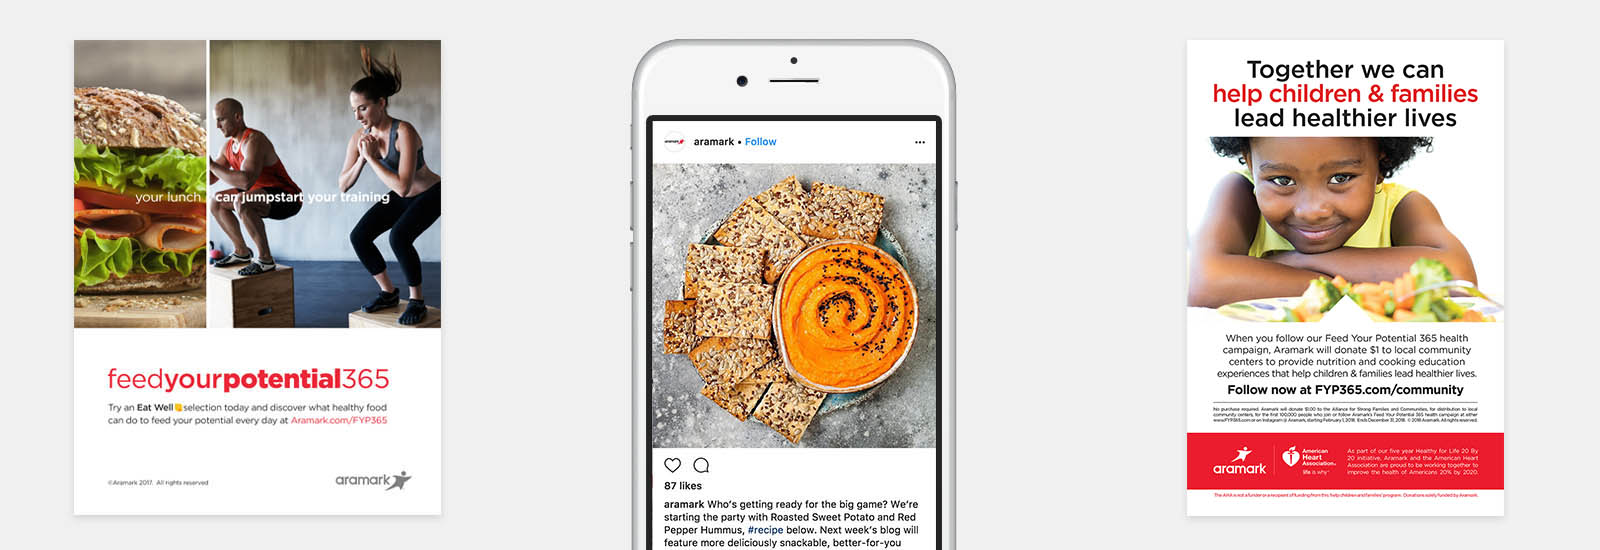 Feed your potential 365 empowering Americans to discover healthy foods APP